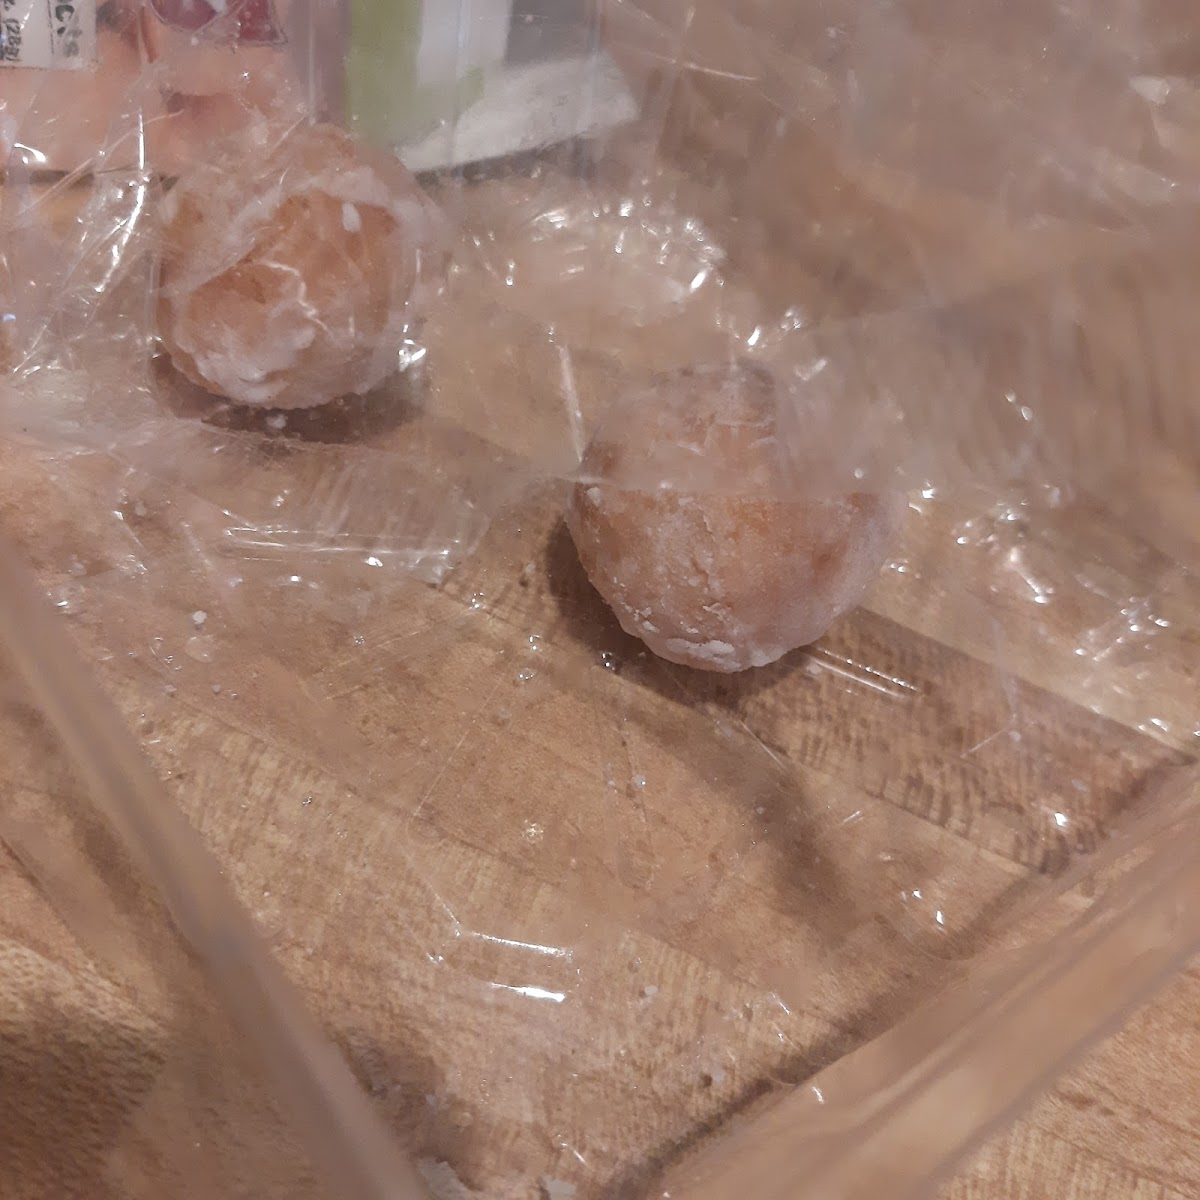 My frozen donuts from the grocery store.